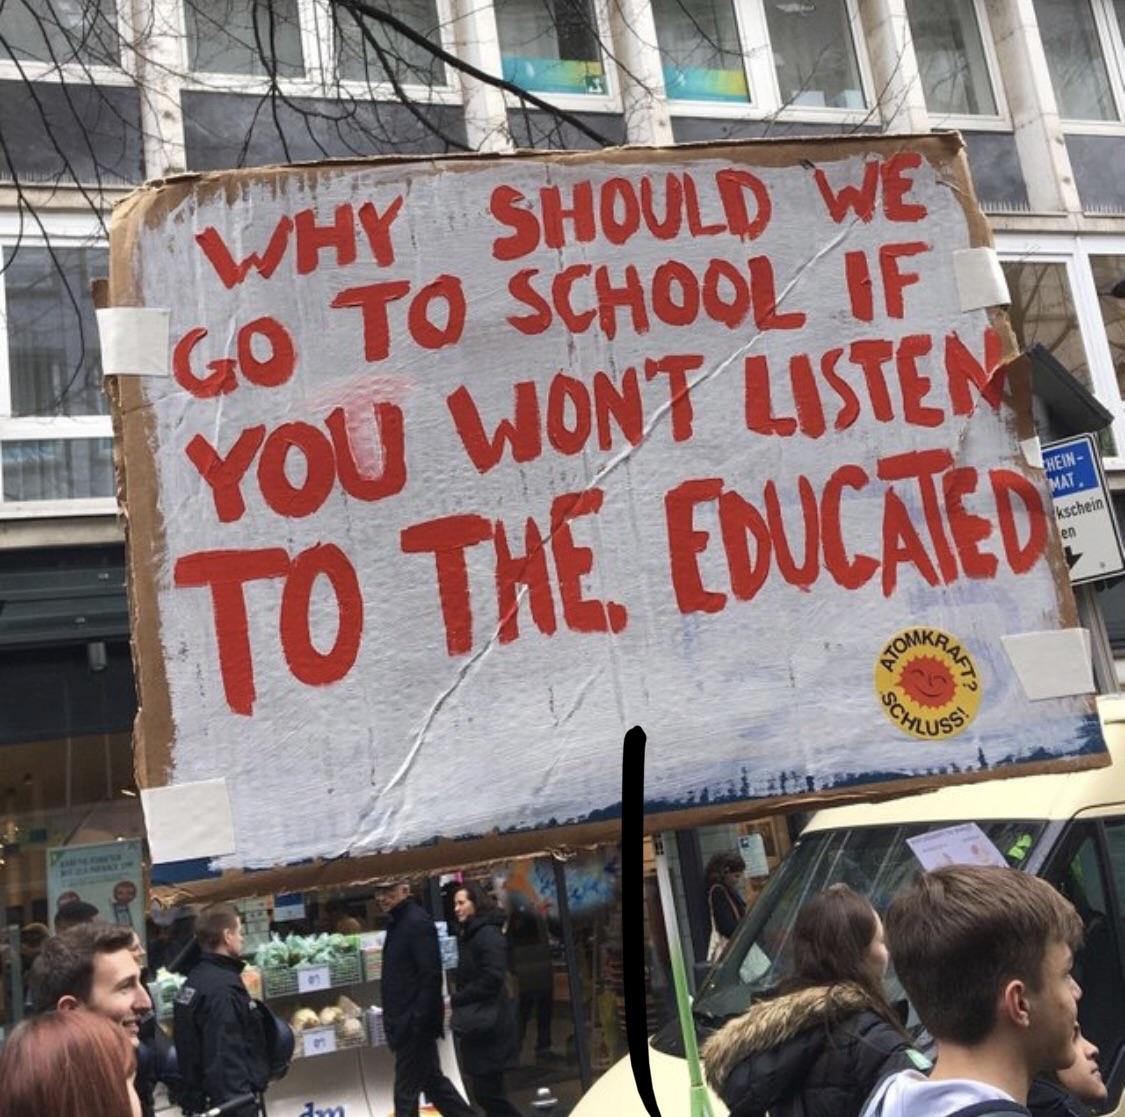 climate protest sign - Why Should We Co To School If Hein . kschein You Wont Listen To The, Educated Komka Suss